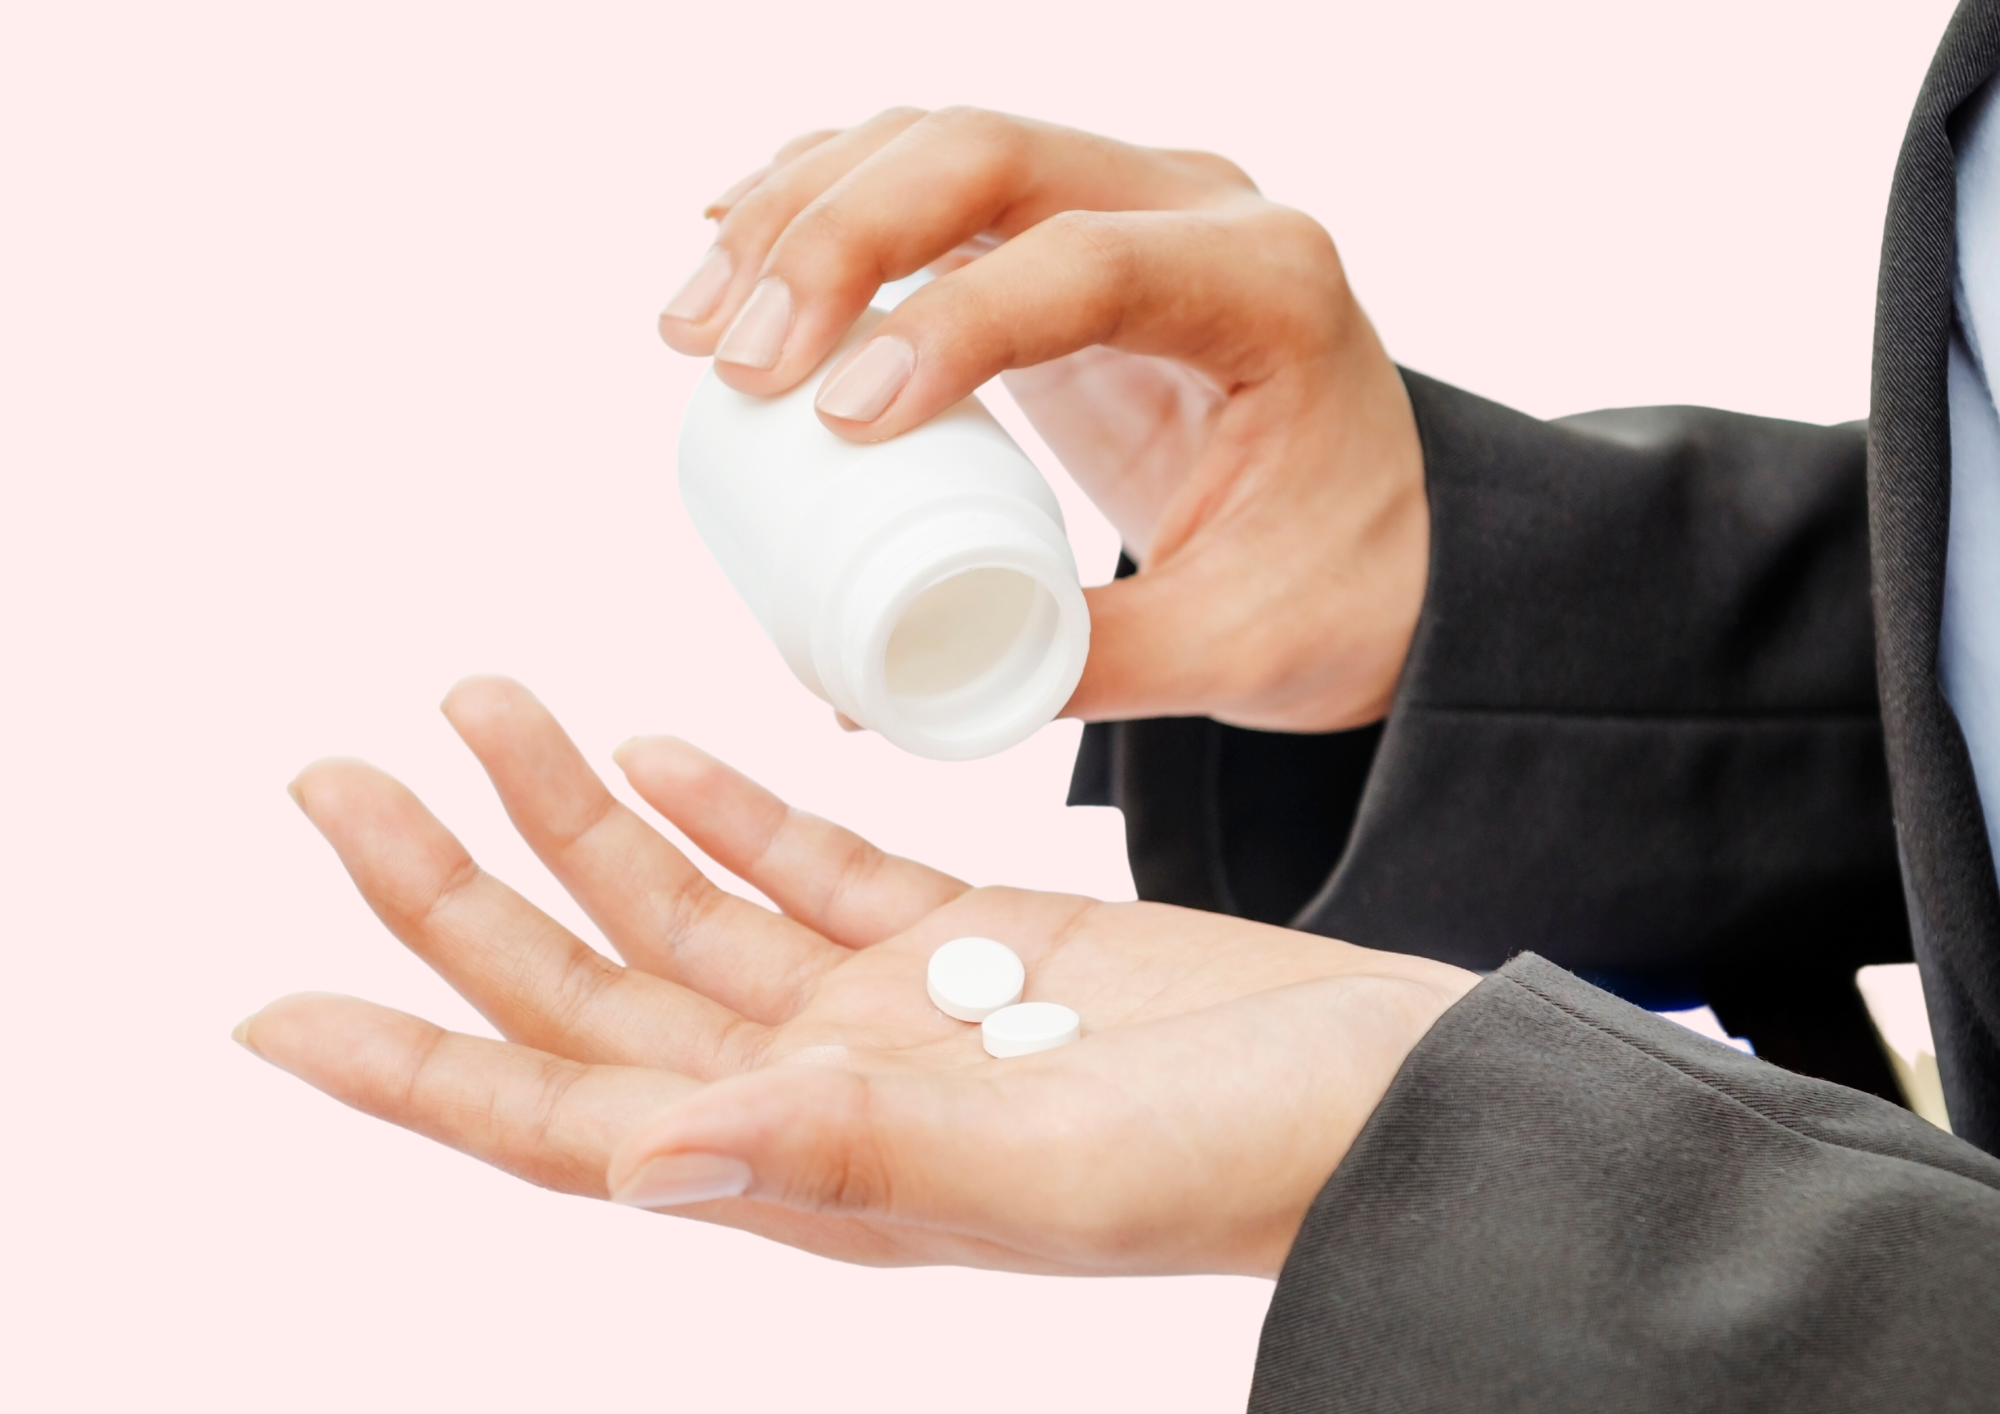 Woman is pouring pills onto her hand. Pink background.